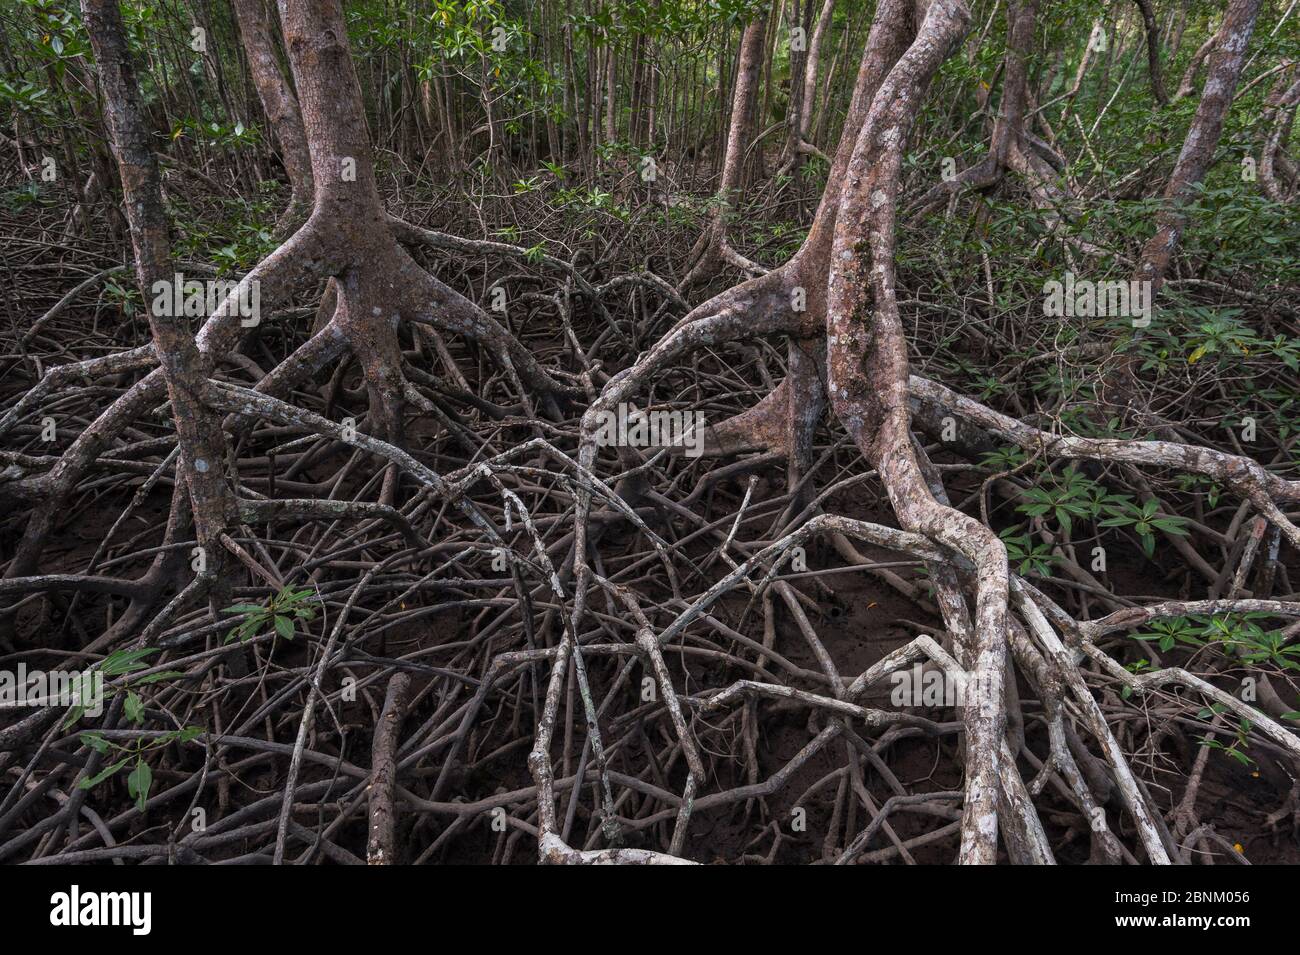 Red mangrove forest (Rhizophora mangle) along the Pacific coast of Costa Rica, March 2015. Stock Photo